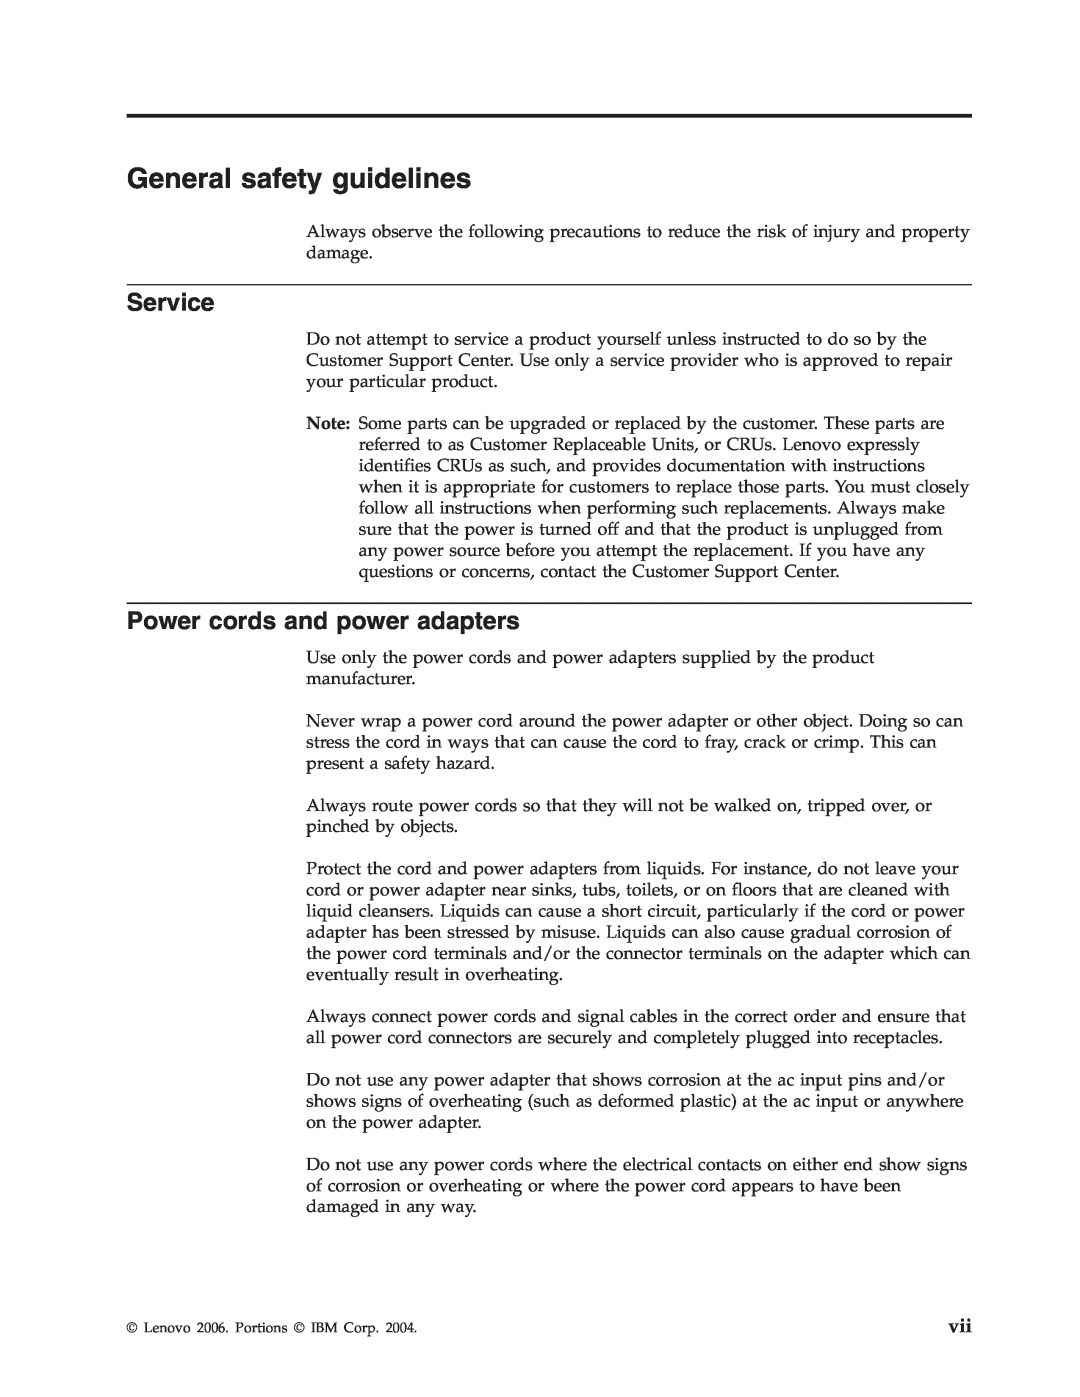 Lenovo 40Y8710 manual General safety guidelines, Service, Power cords and power adapters 